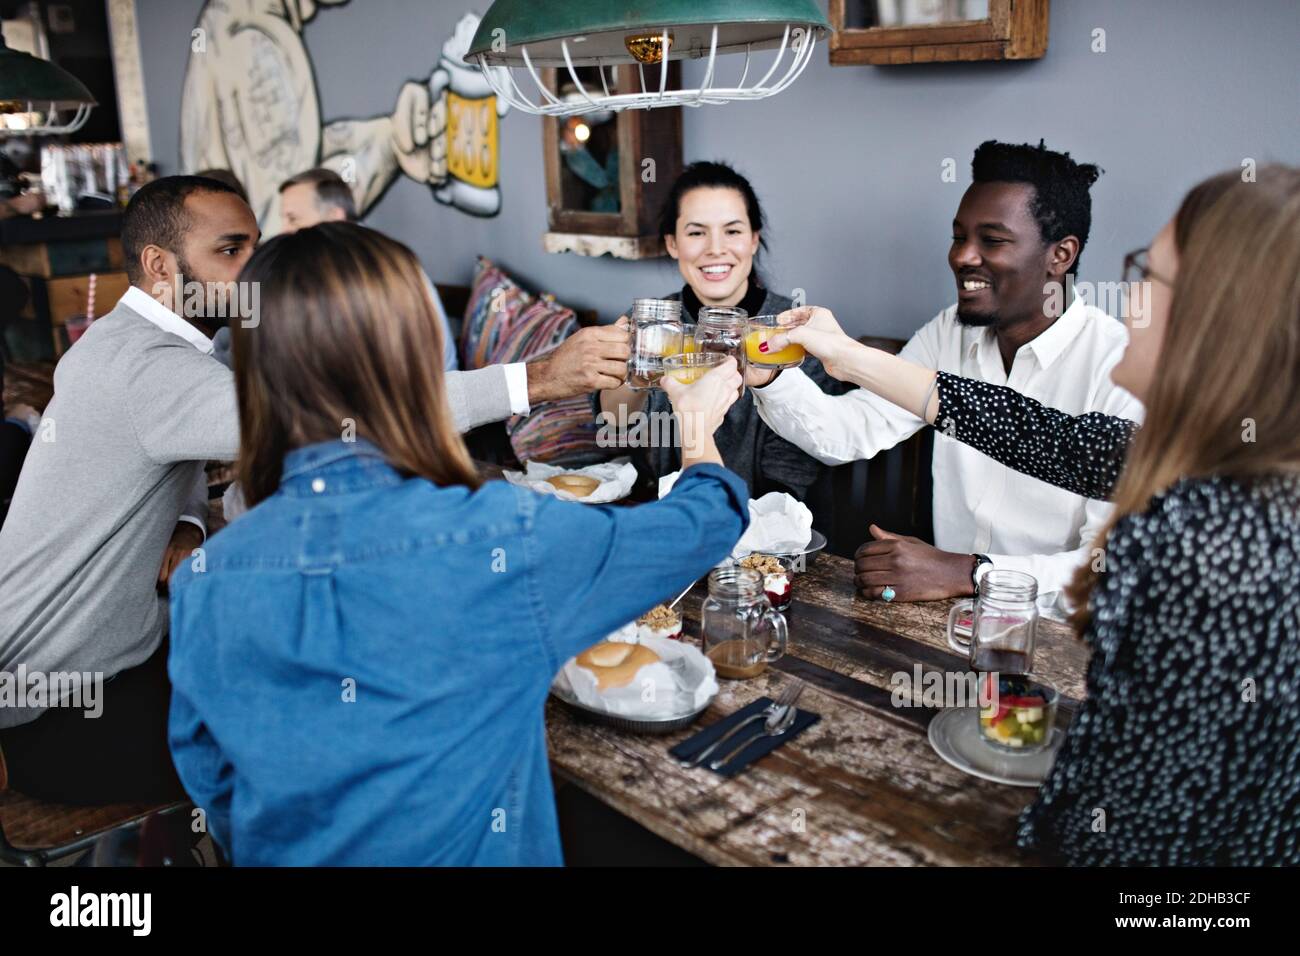 Happy friends toasting drink while sitting at dining table in restaurant Stock Photo